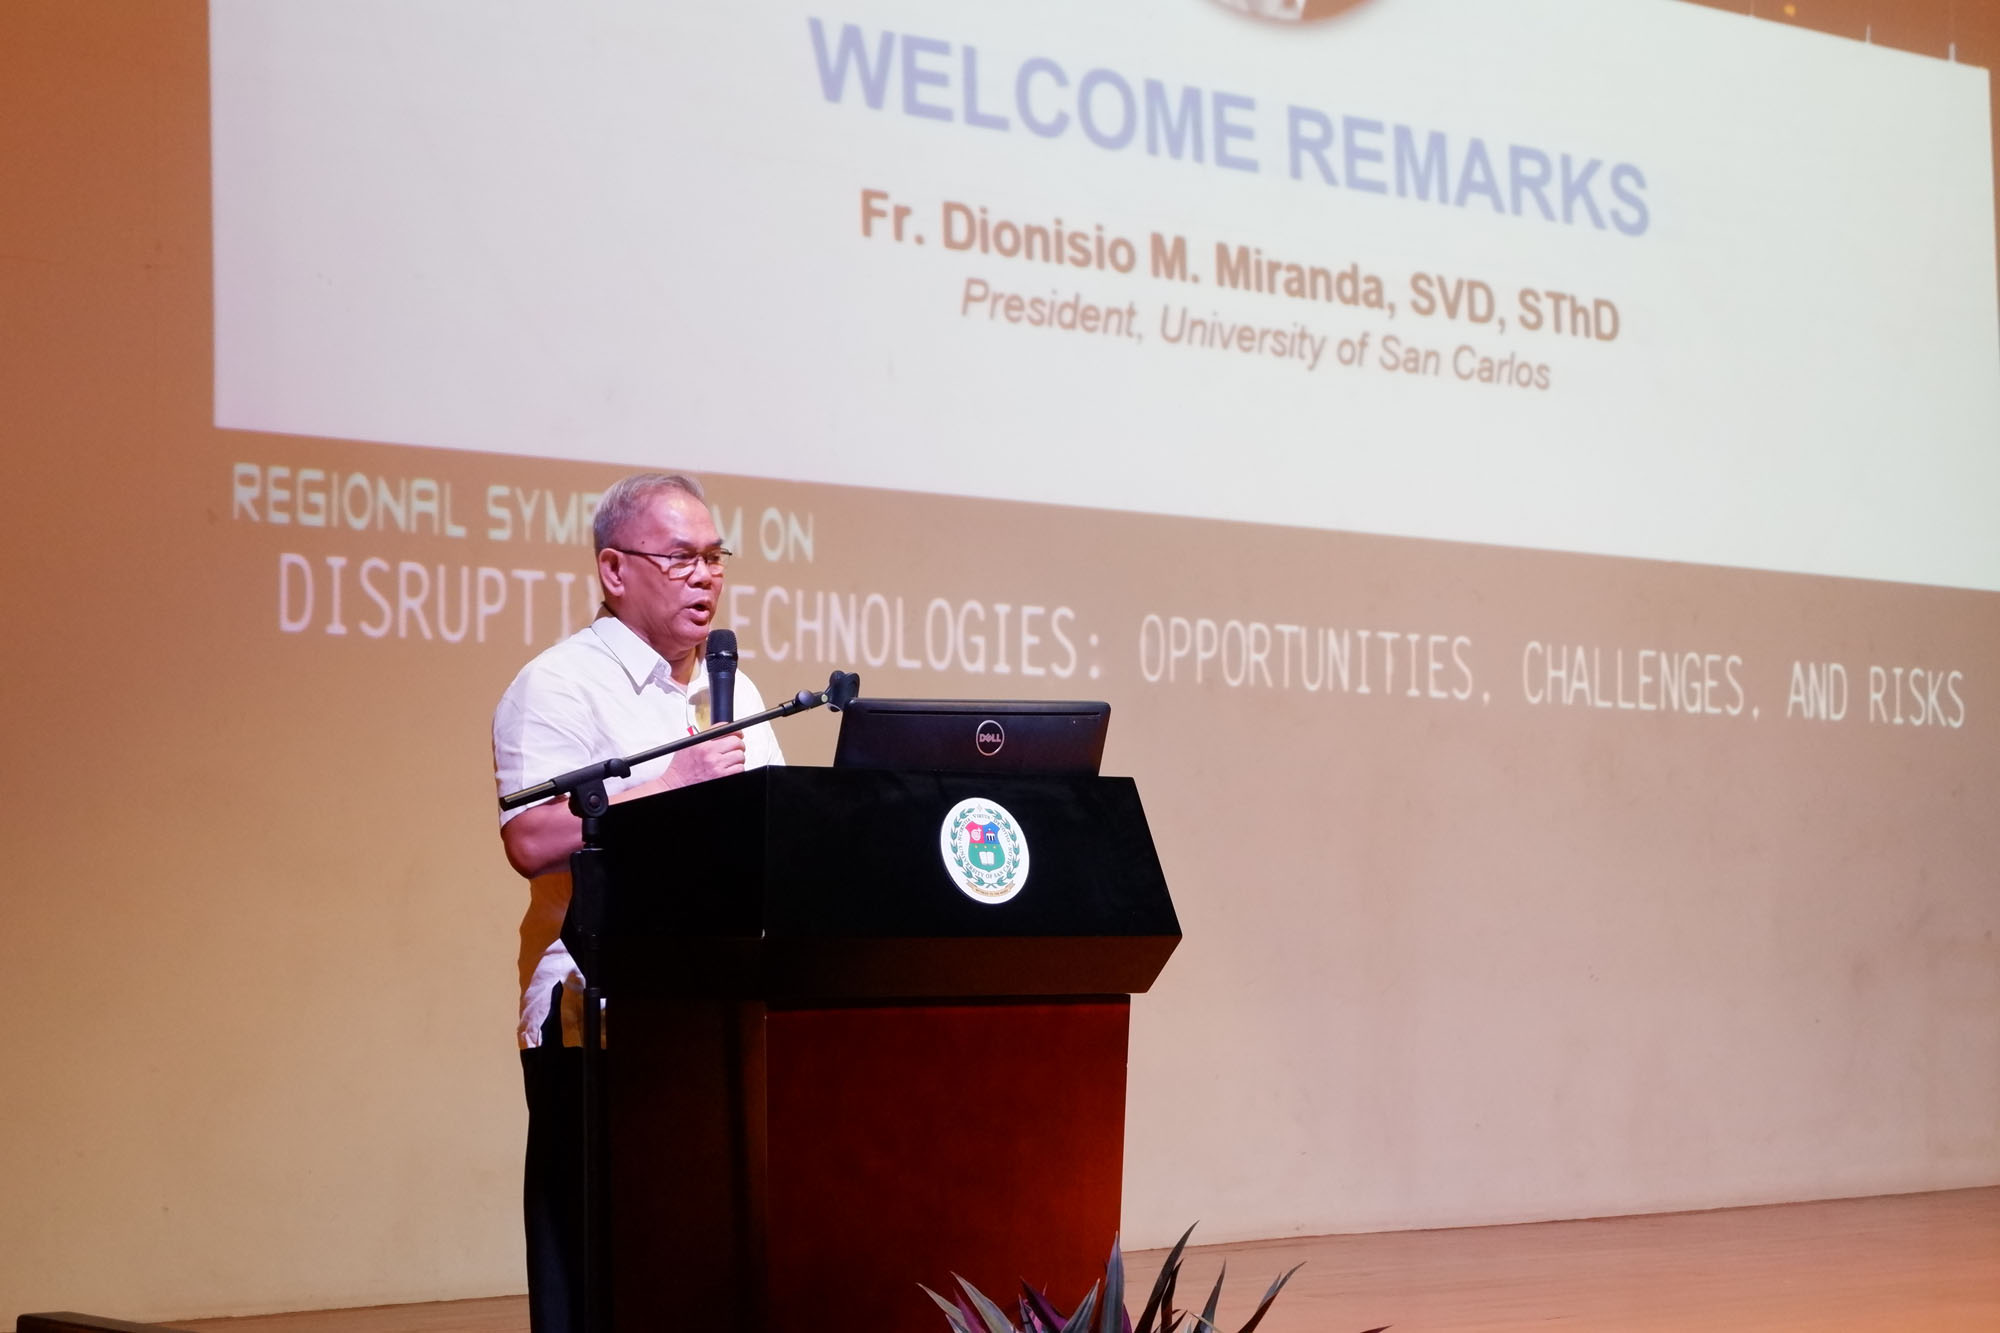 PASCN Regional Symposium on Disruptive Technologies: Opportunities, Challenges, and Risks-pascn-usc-12-20190123.jpg